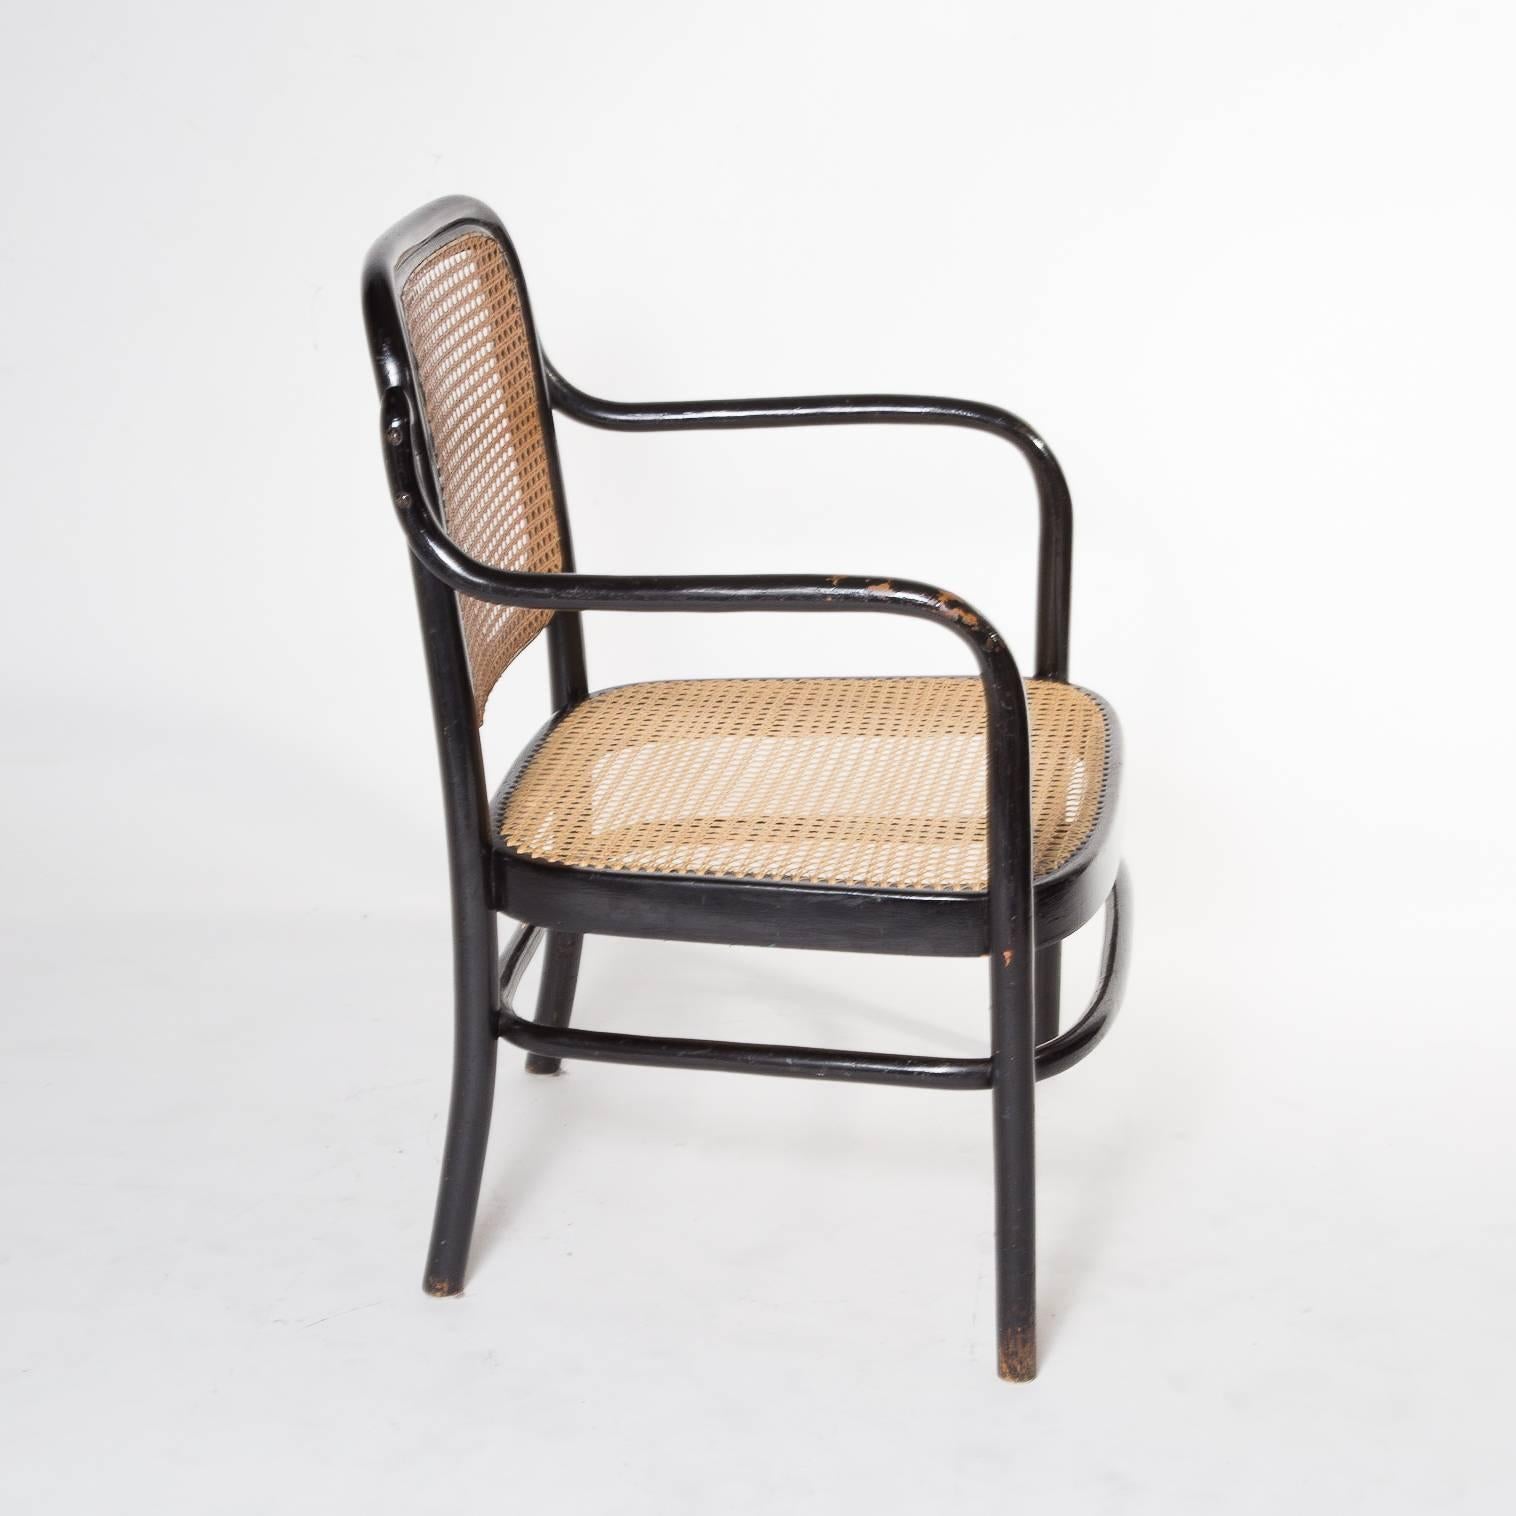 Art Deco Early Pair of Thonet Adolf Schneck A61F Bentwood Low Chairs, Austria, 1925